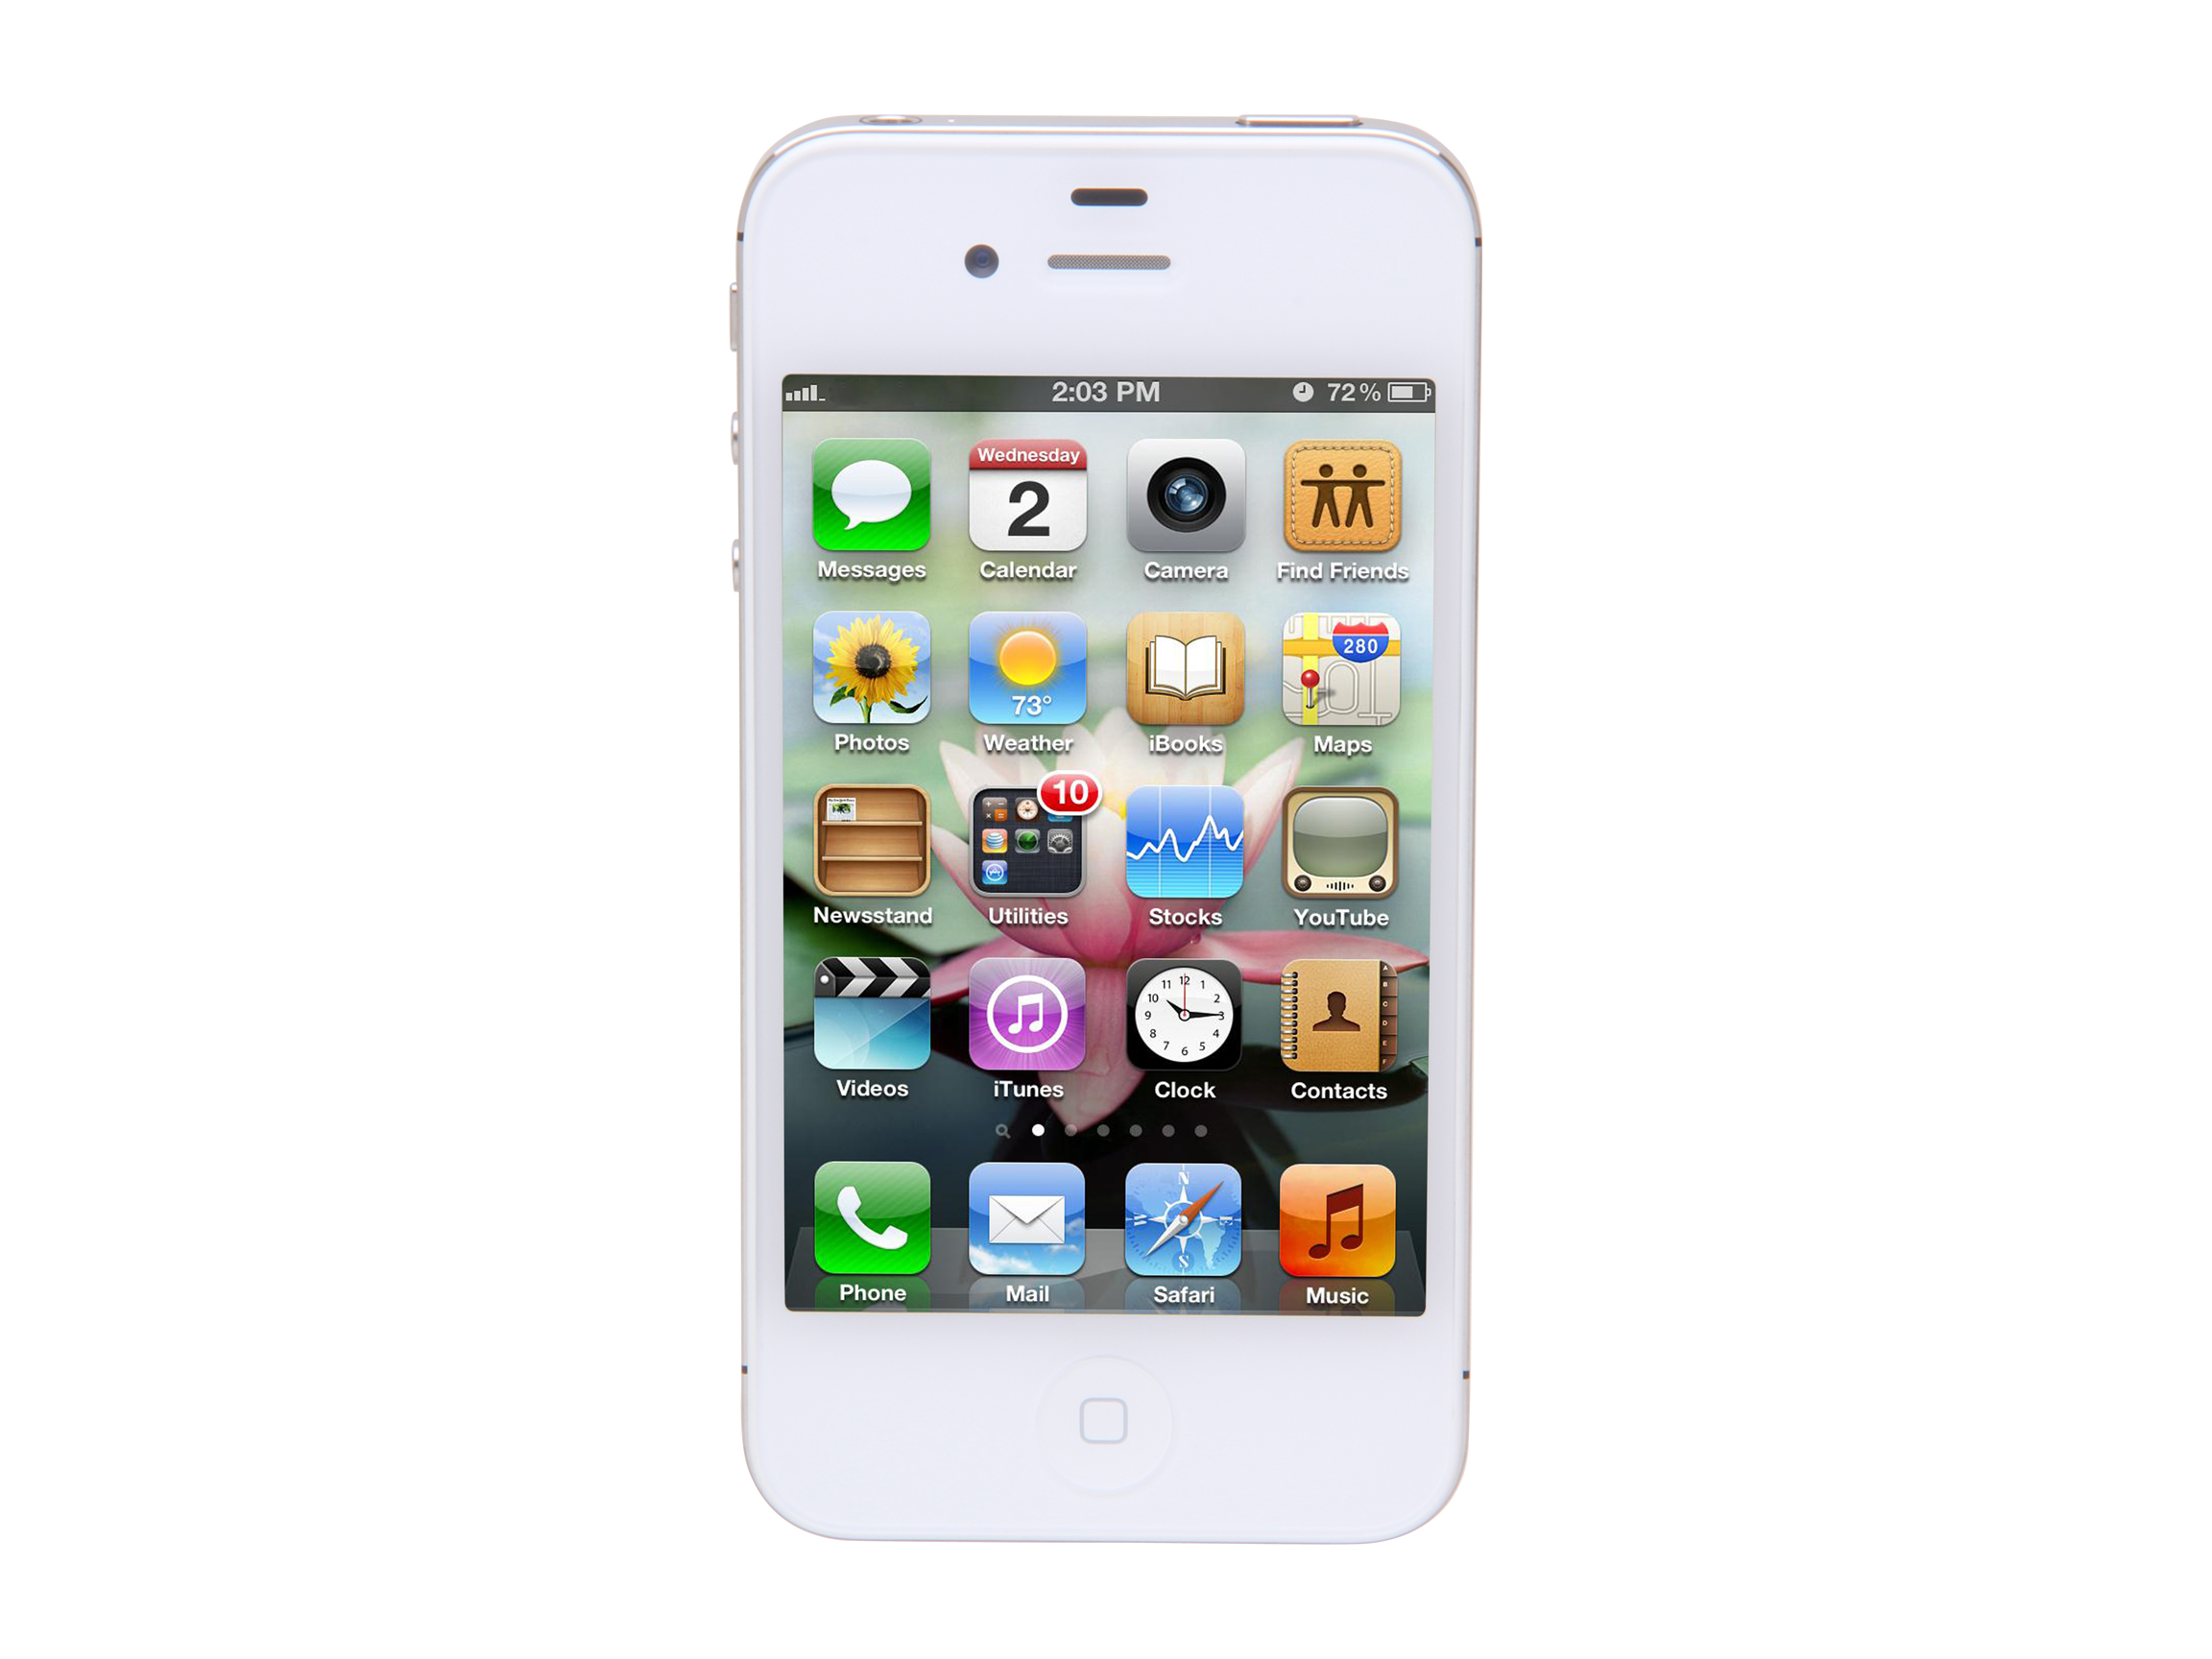 Unlocked AT&T Apple iPhone 5 White 4G LTE GSM Smart Phone with 4" Screen/ iOS 6 / 16GB Memory (MD635LL/A) 